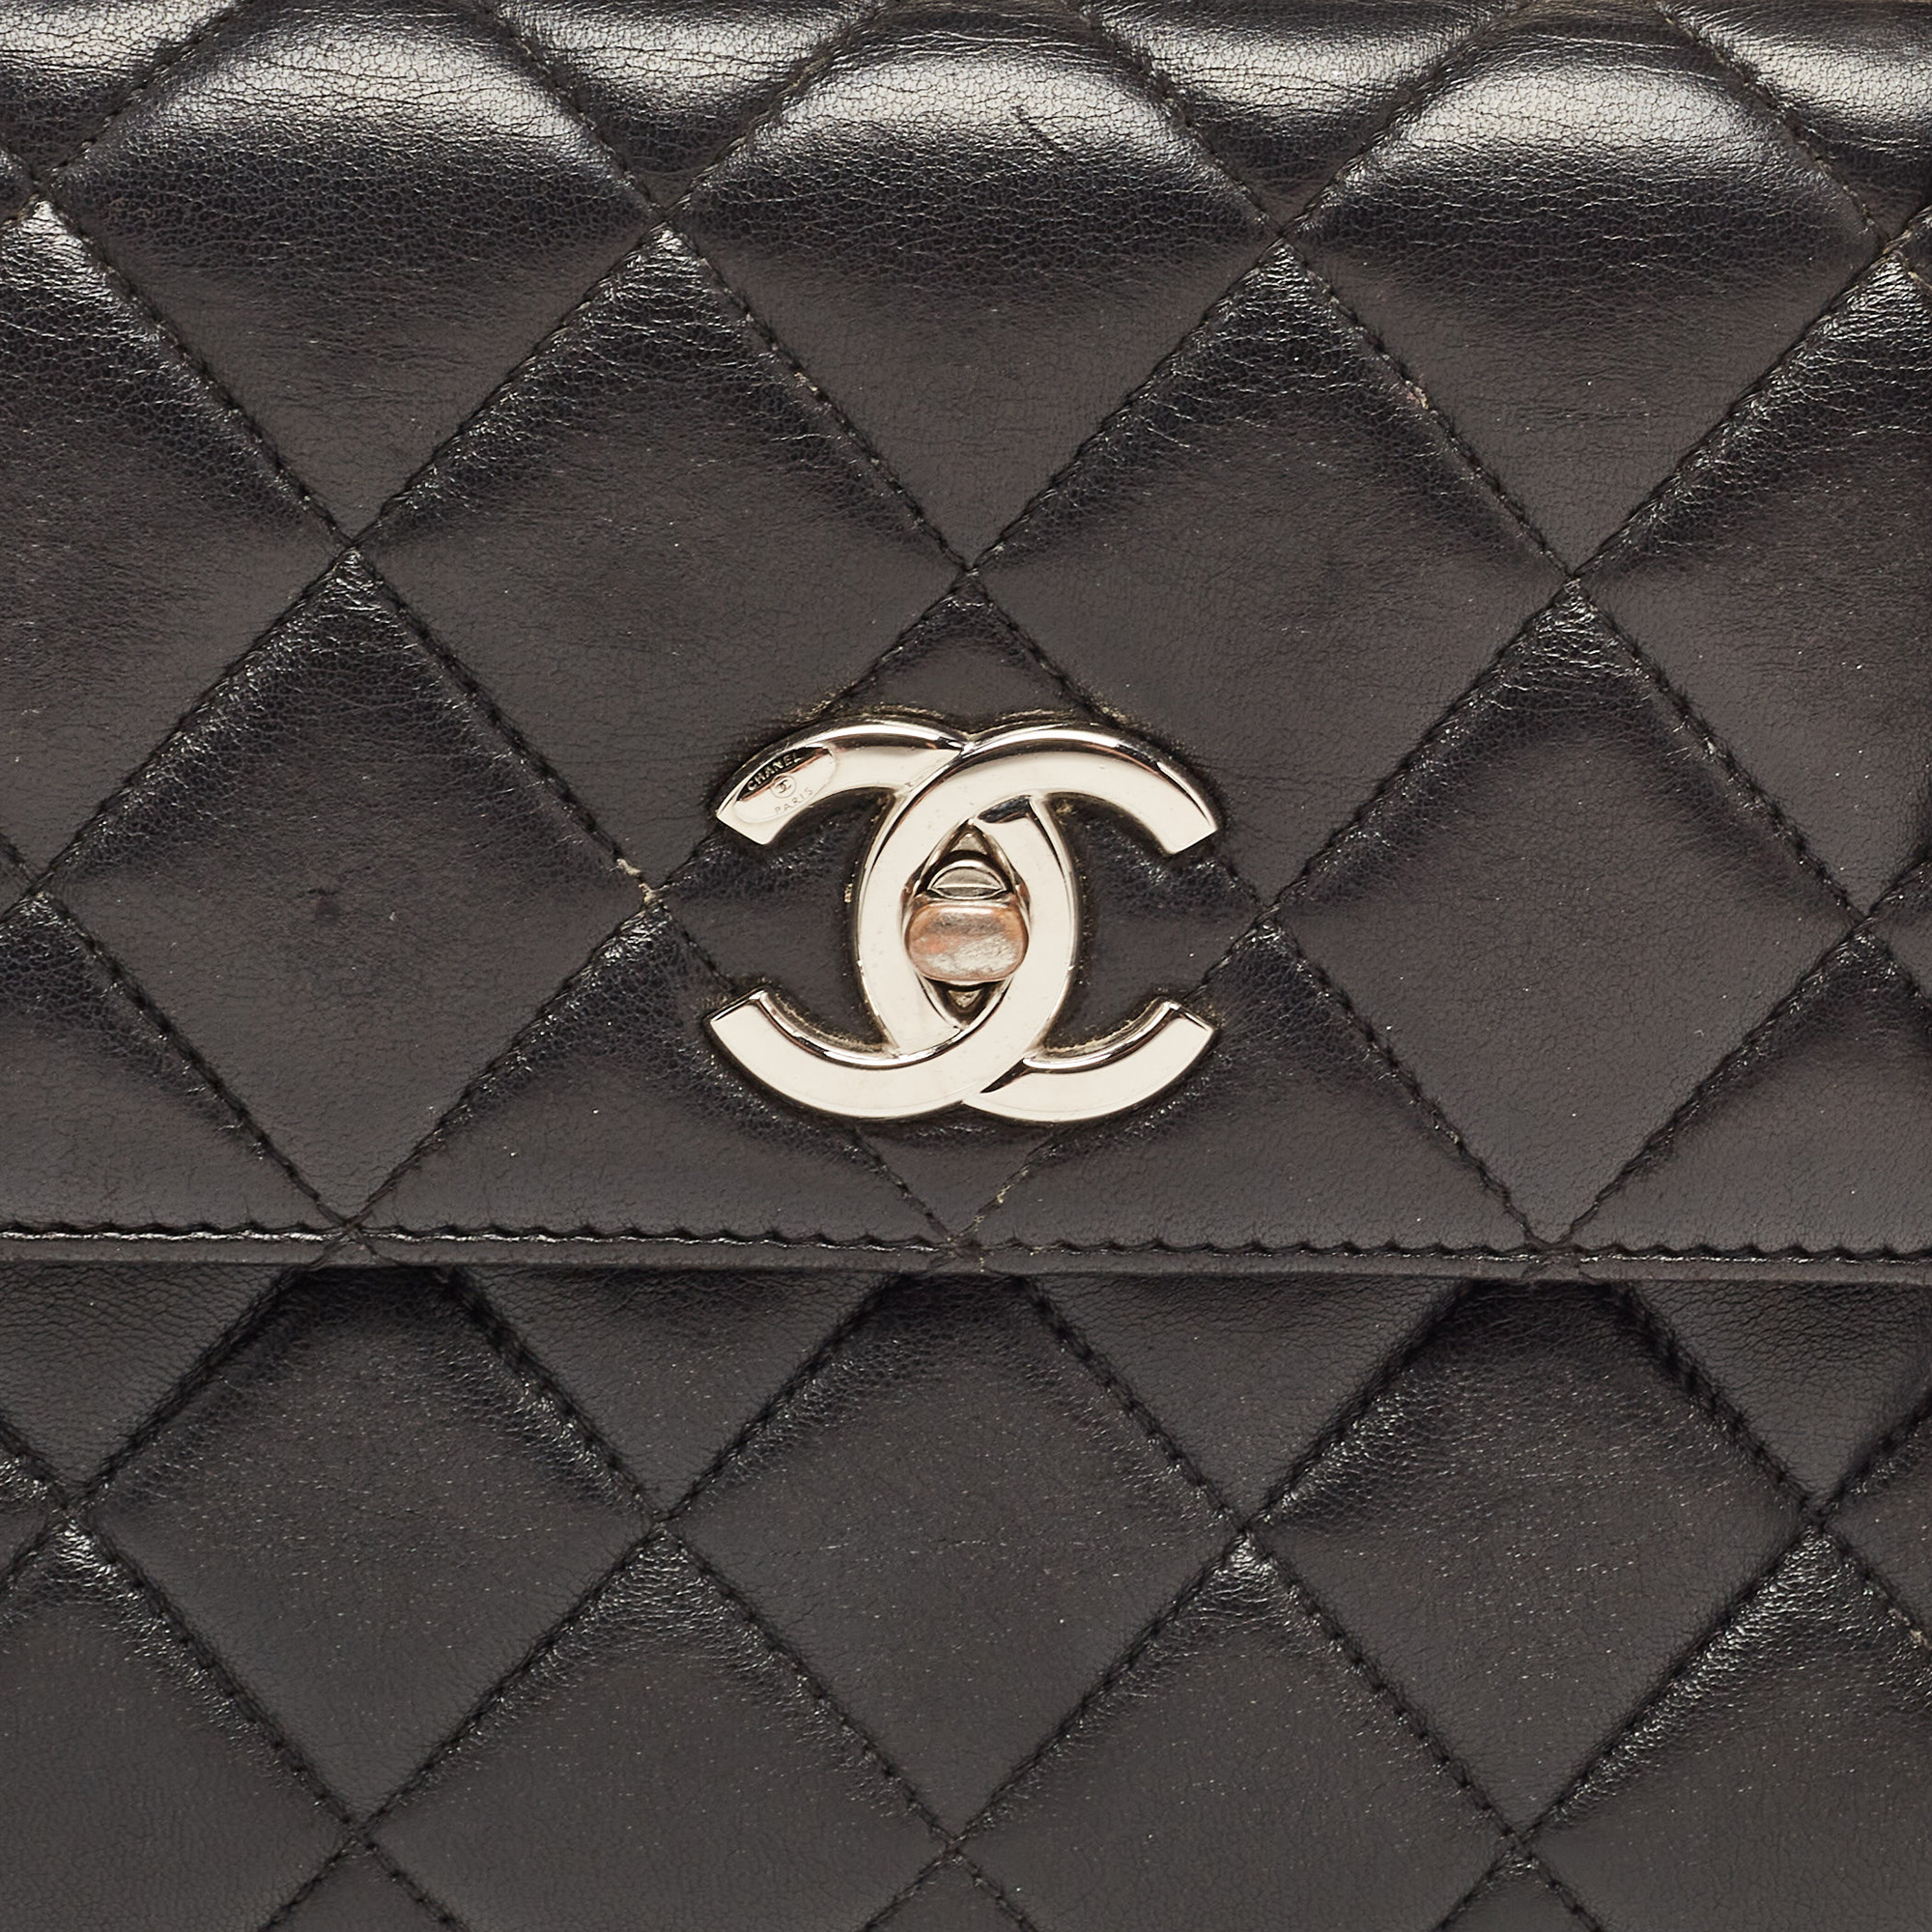 Chanel Black Quilted Leather Small Trendy CC Flap Top Handle Bag